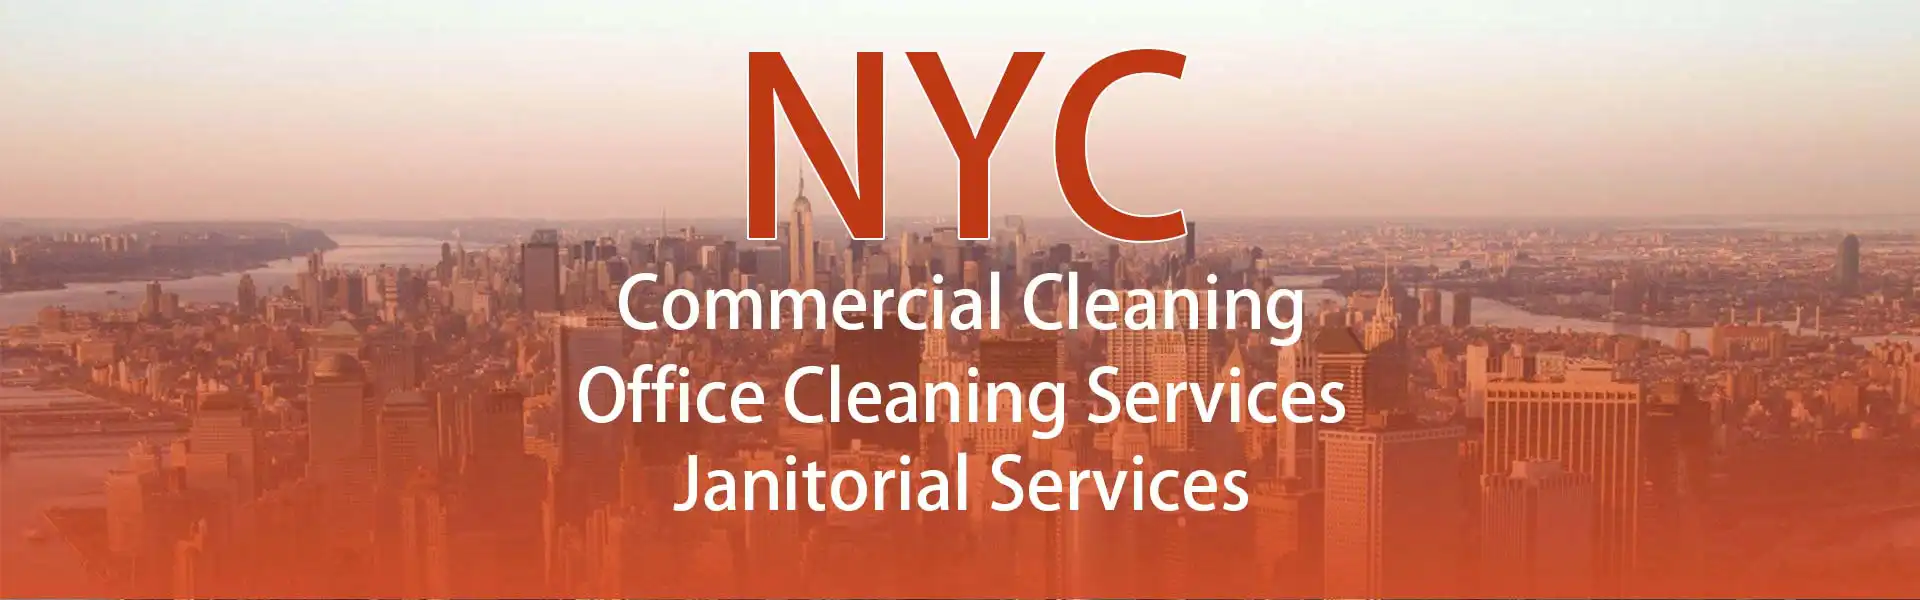 Commercial Office Cleaning Business NYC